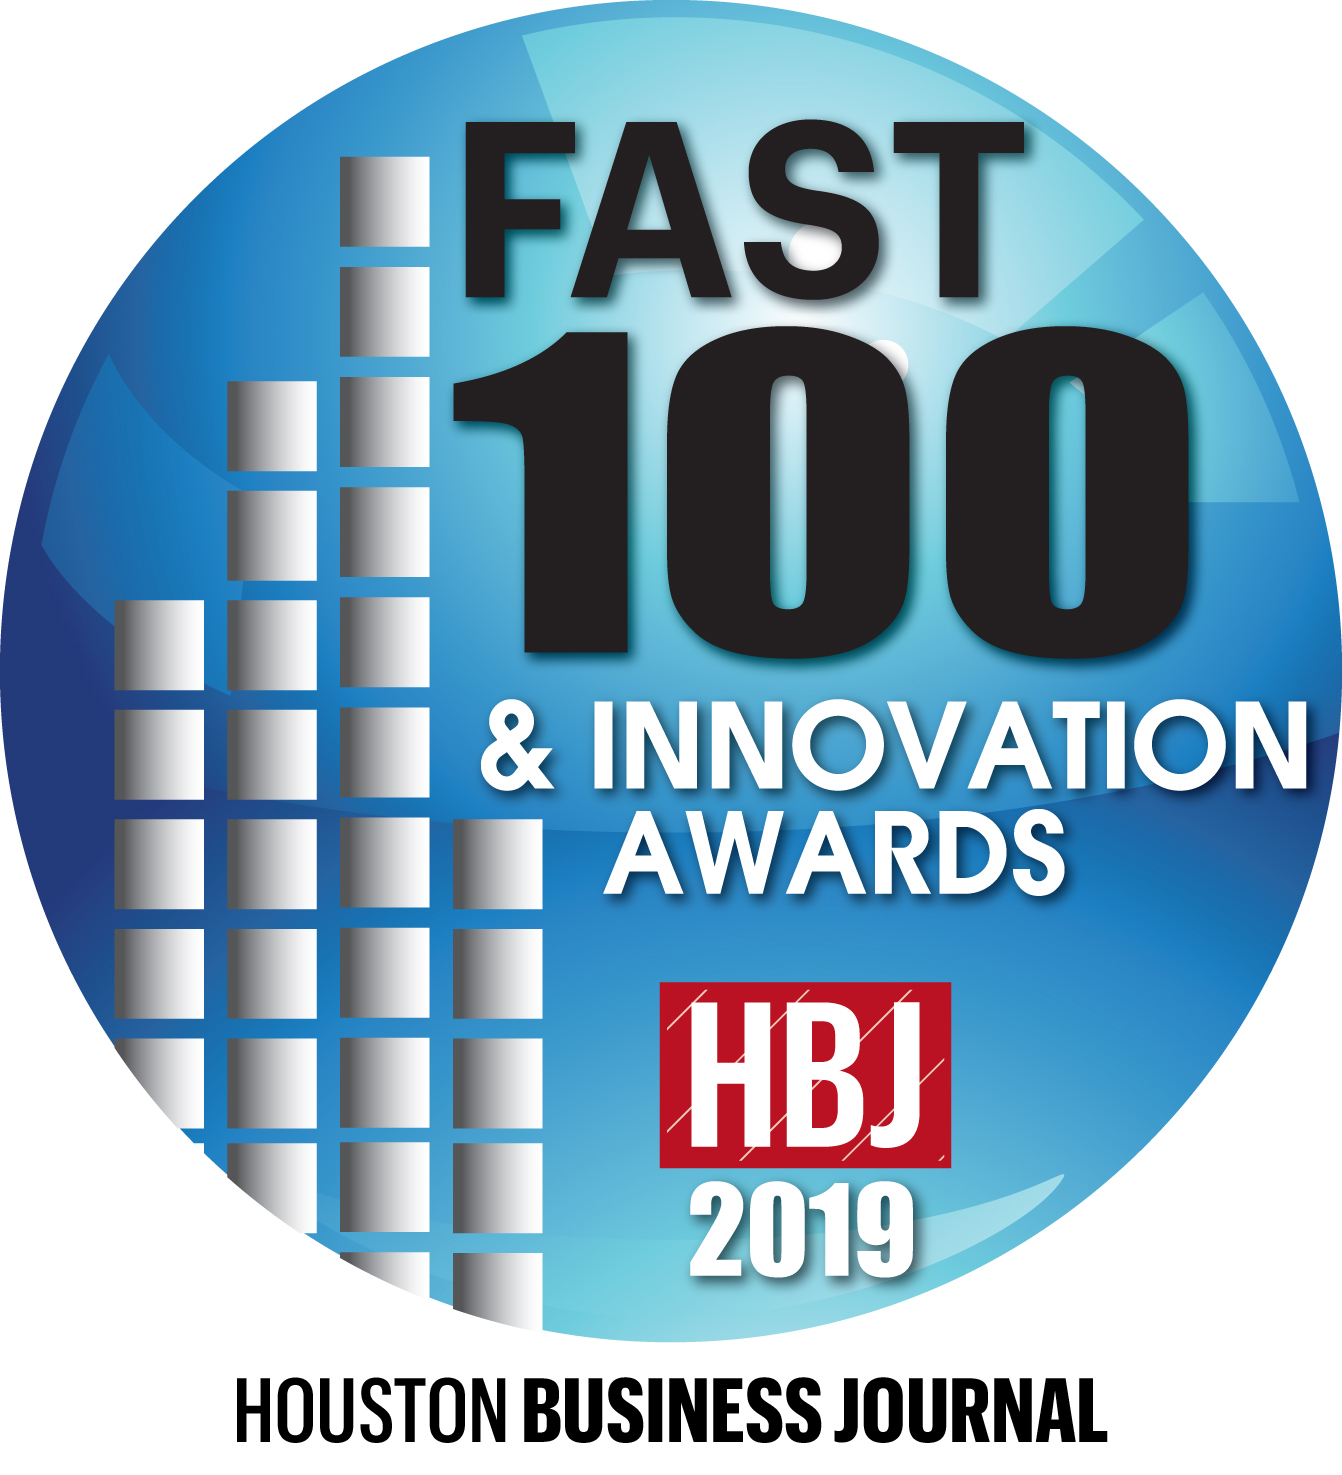 The Fast 100 has become the hallmark of entrepreneurial success for the Houston area.